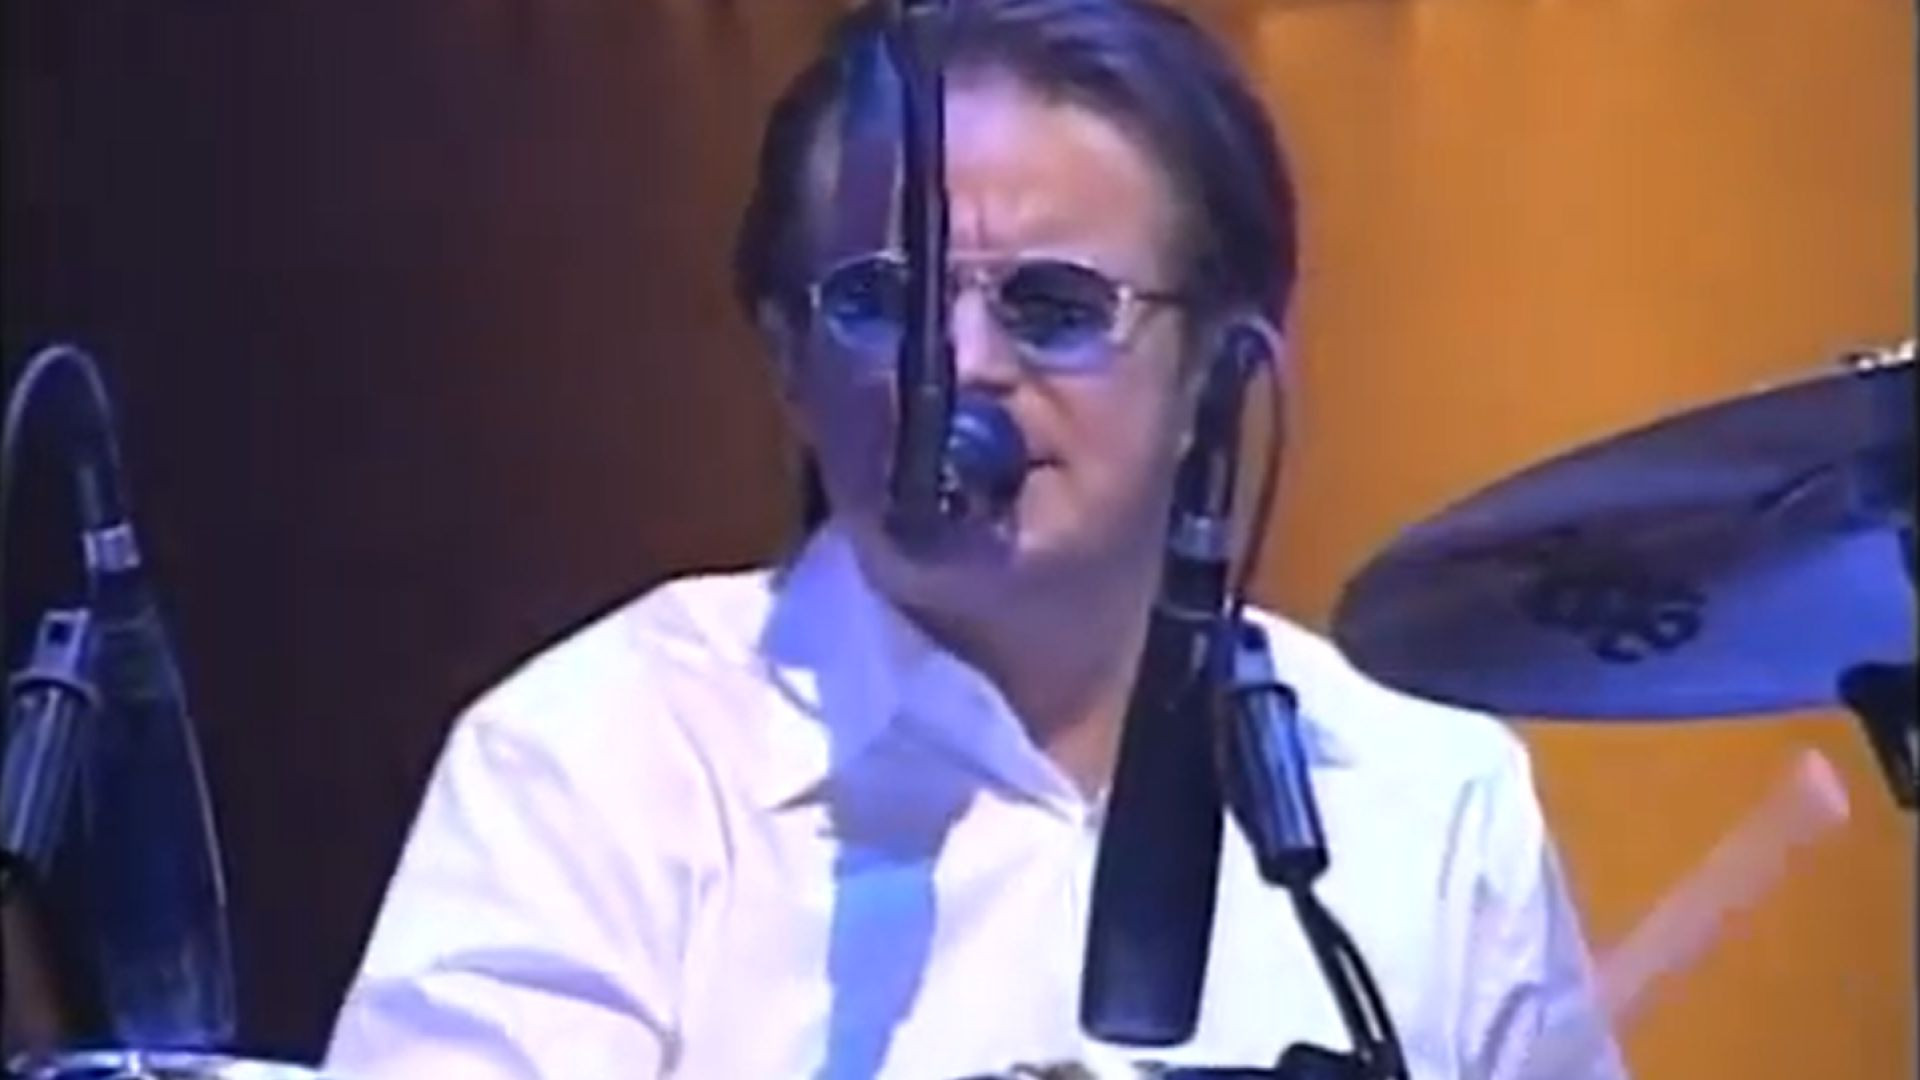 Eagles perform Hotel California at the 1998 Rock